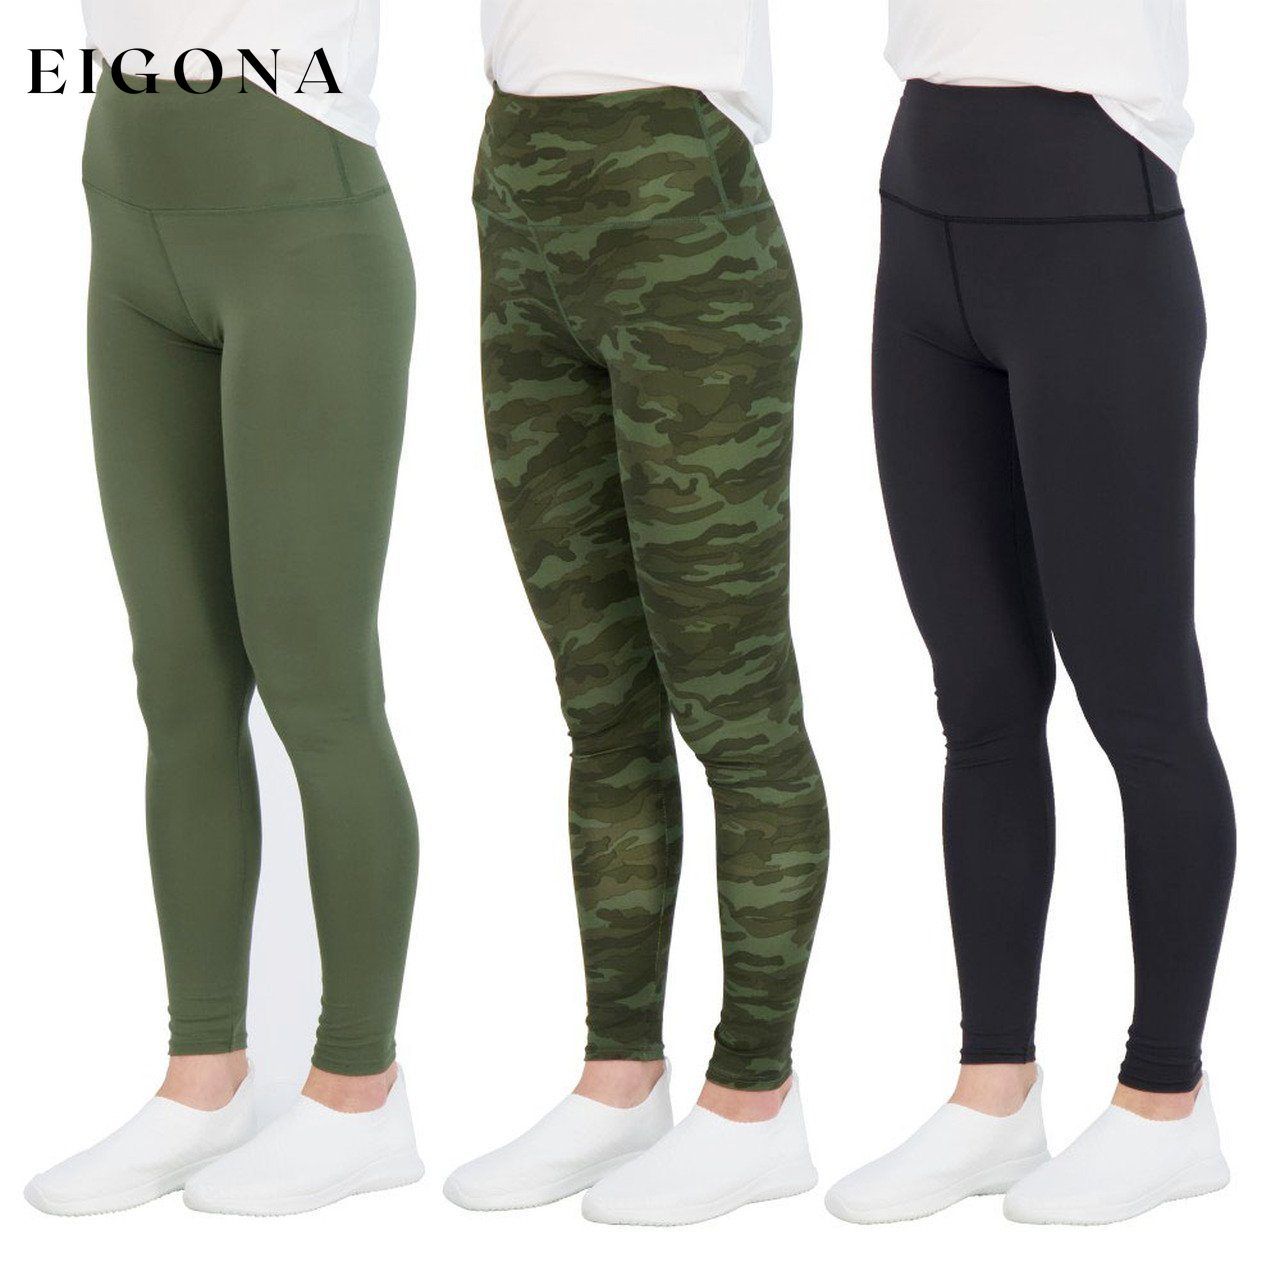 3-Pack: Women's Active Athletic Performance Leggings Green Camo Black __stock:50 bottoms refund_fee:1200